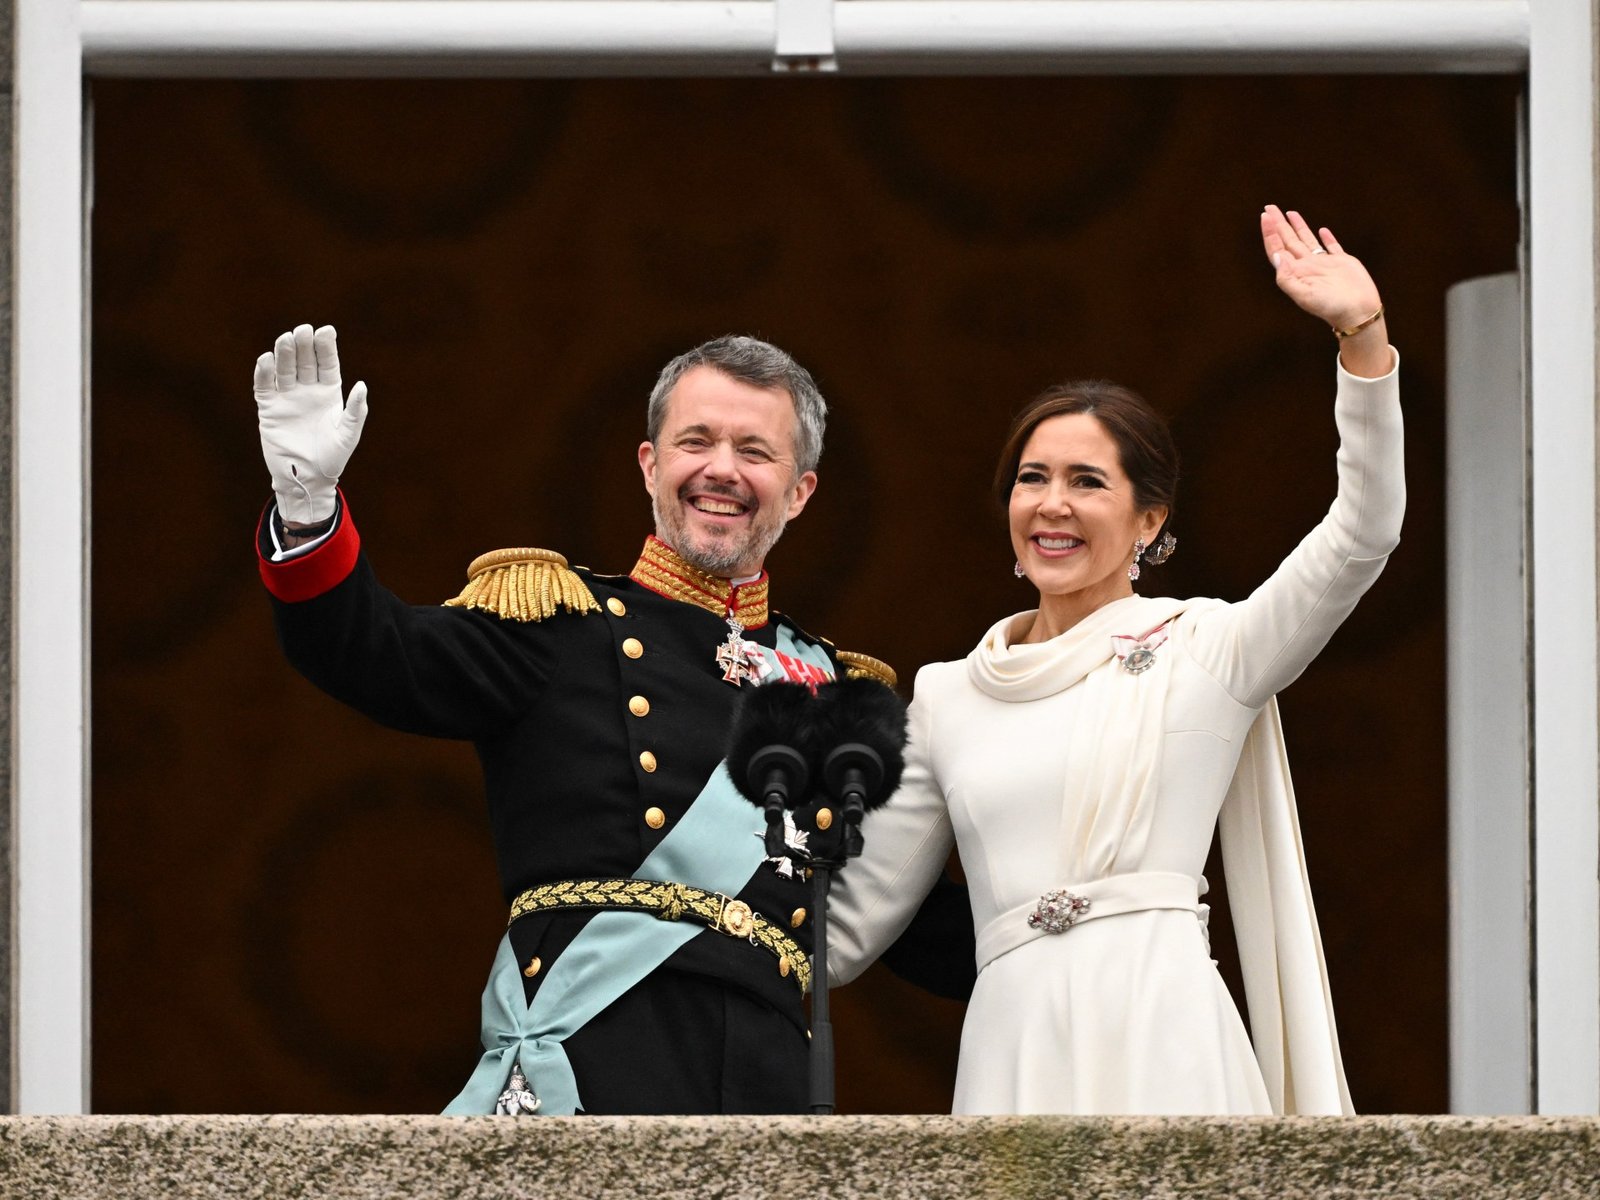 Denmarks King Frederik X takes the throne after queen steps down | Politics News